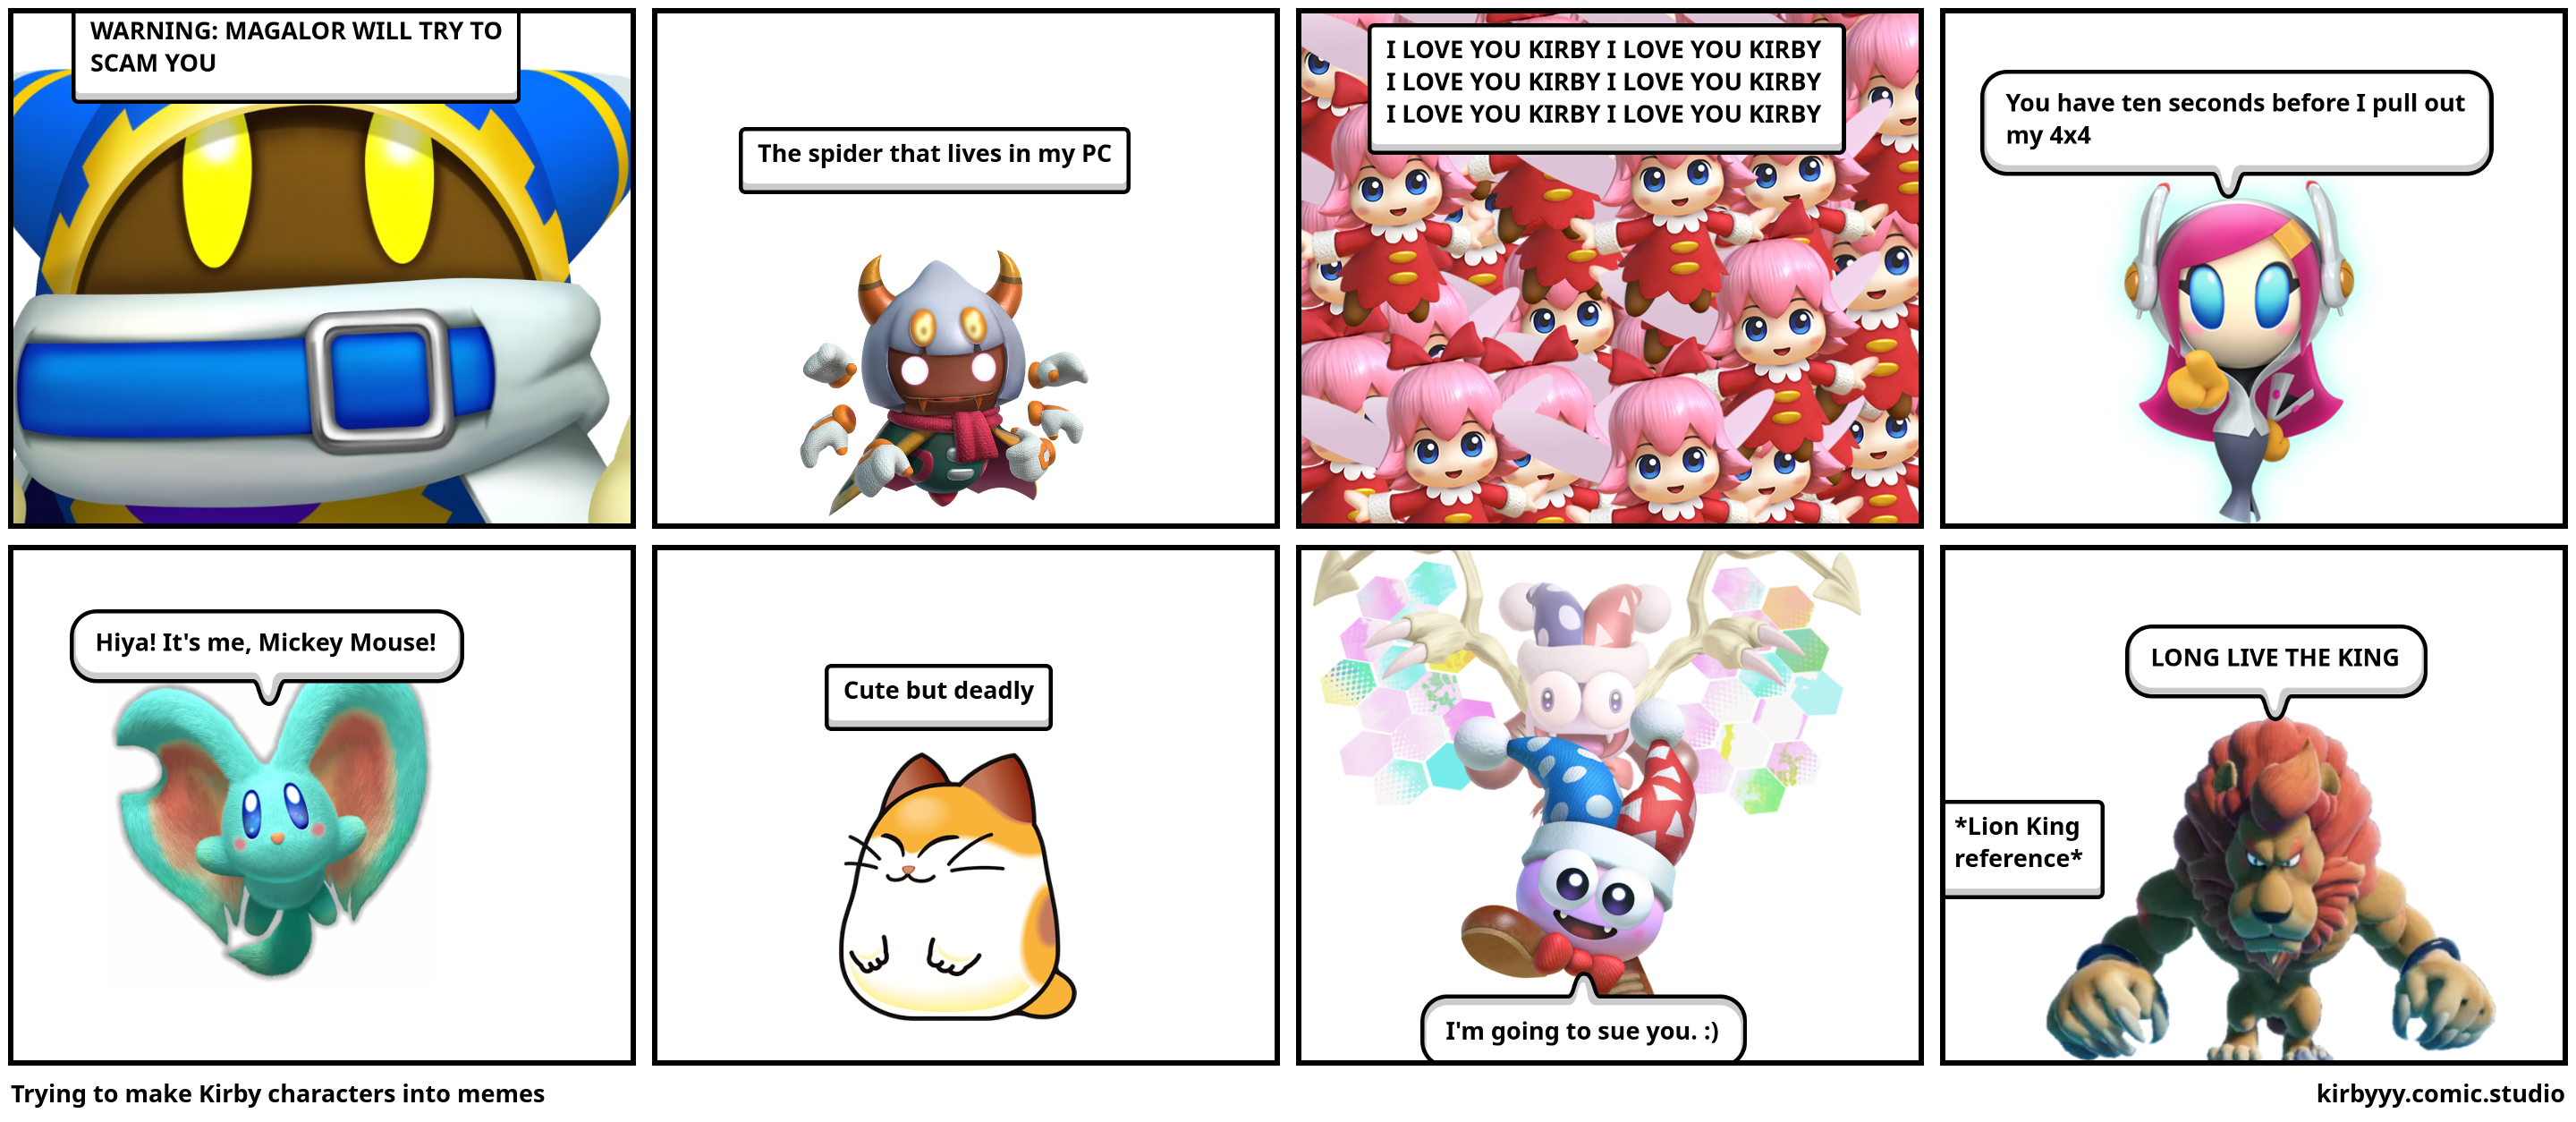 Trying to make Kirby characters into memes